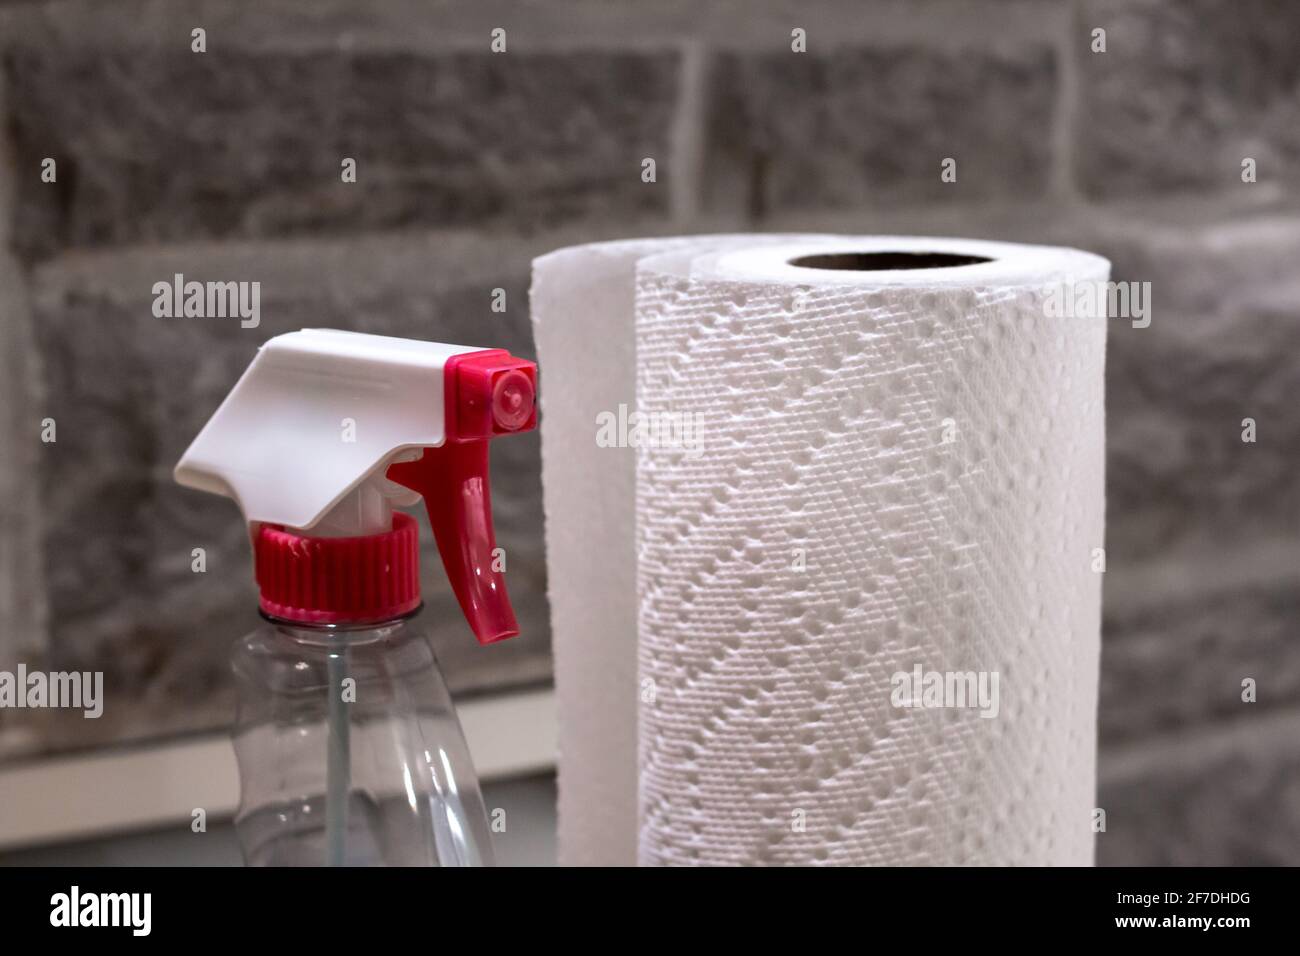 Brandless glass cleaner and a roll of paper towel against brick backdrop, Toronto, Canada, 2021. Stock Photo